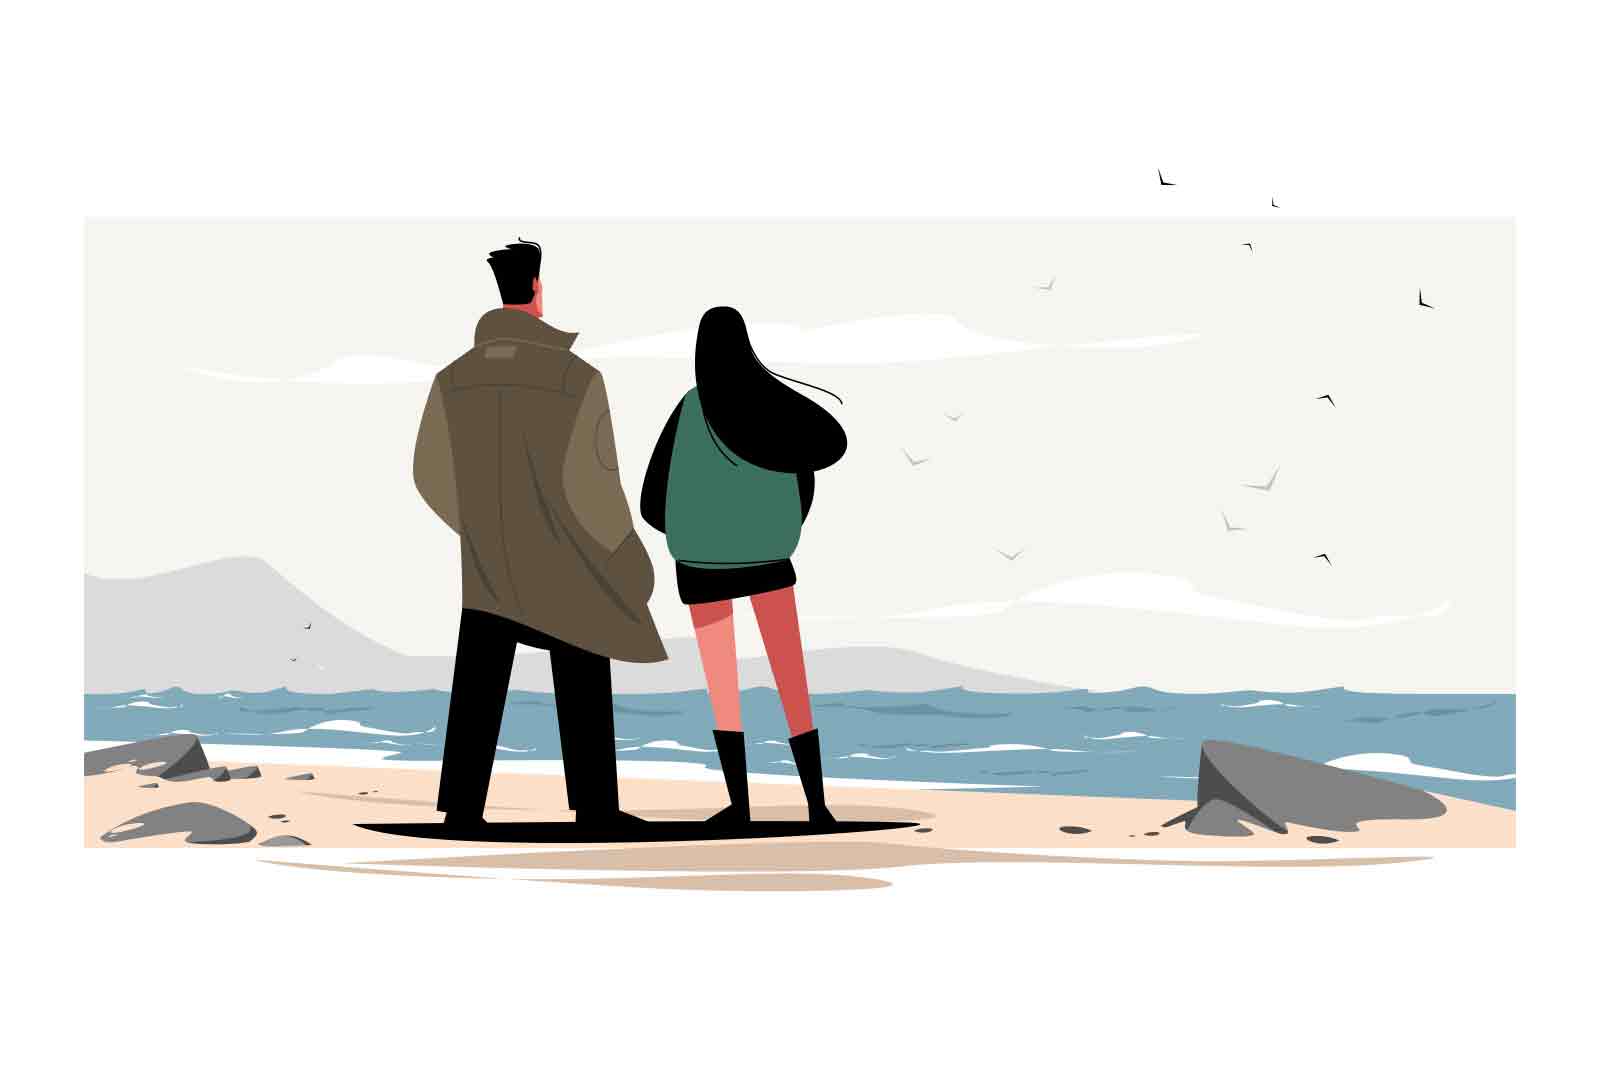 Couple enjoy nature sea view on coast vector illustration. Man and woman watch ocean waves flat style. Romance, date, love, leisure concept